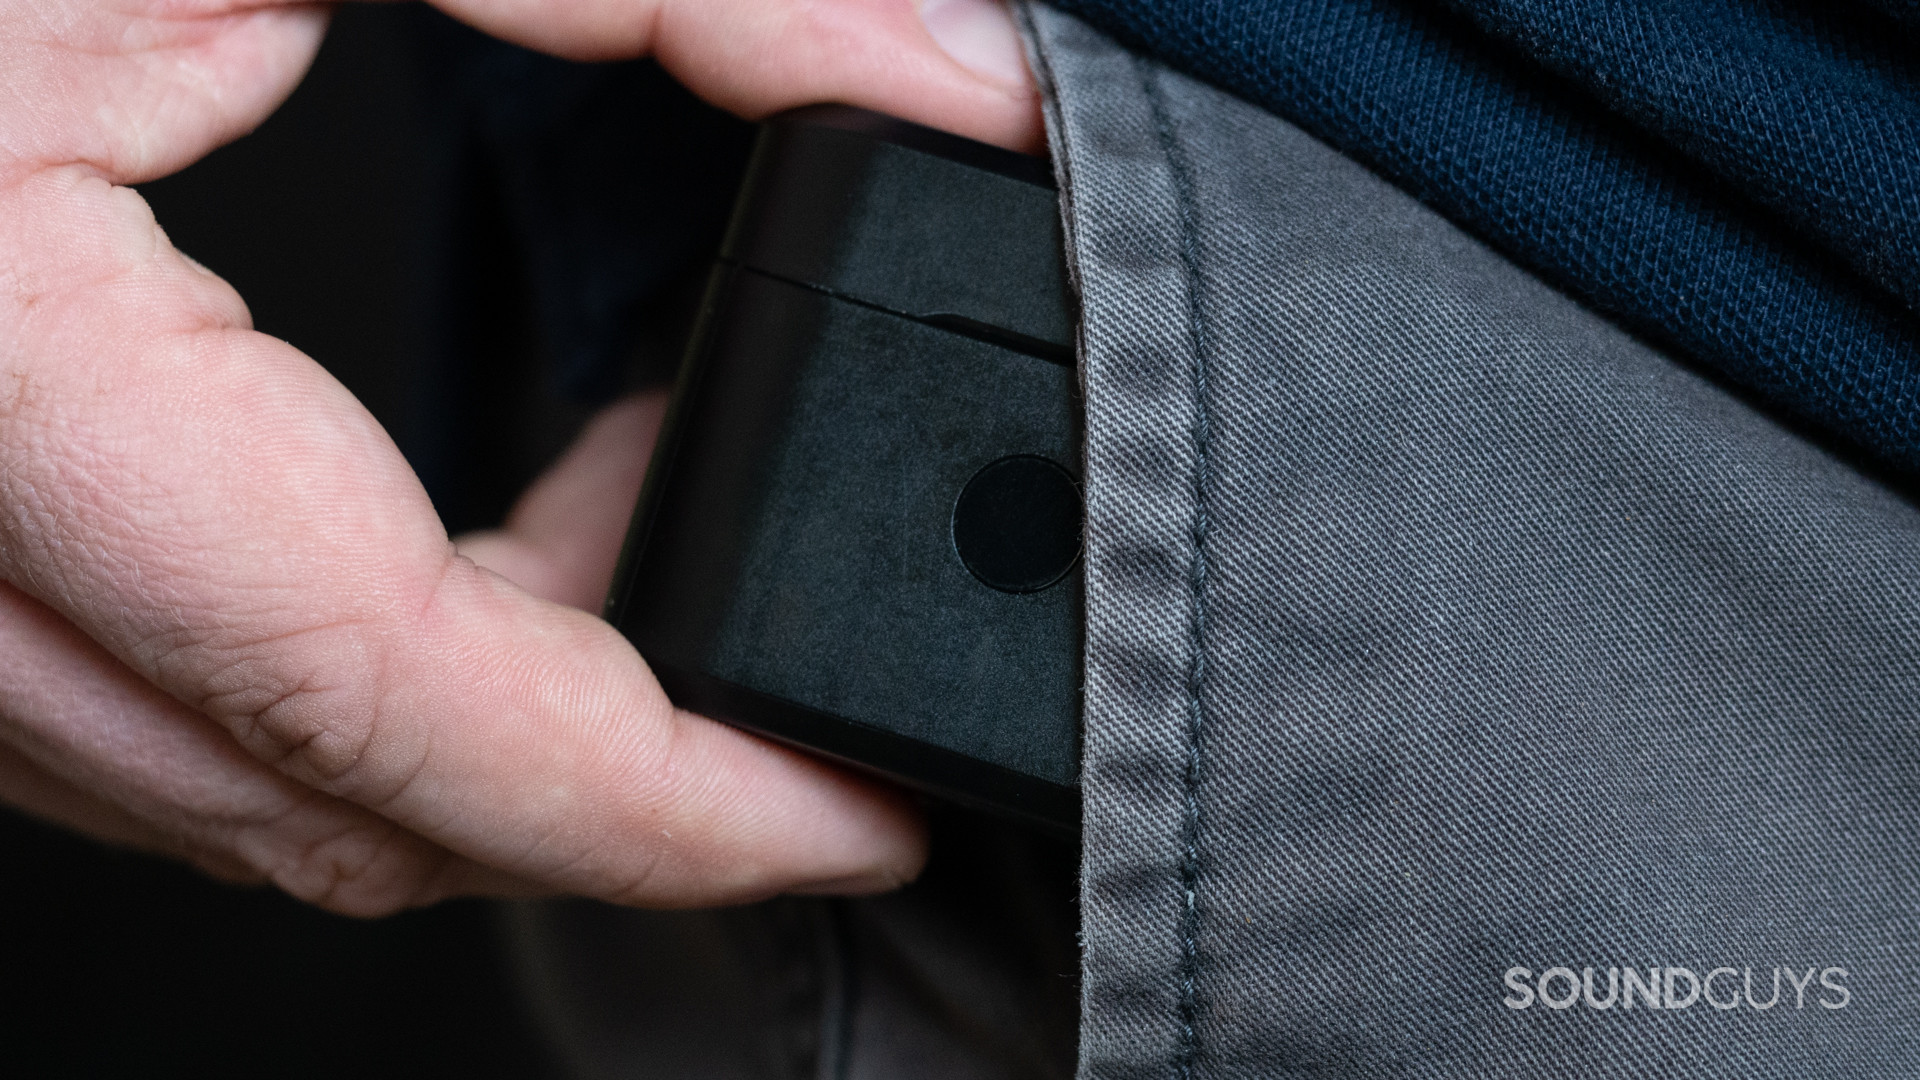 A photo of someone jamming the large charging case of the HyperX Cirro Buds Pro into their pocket.